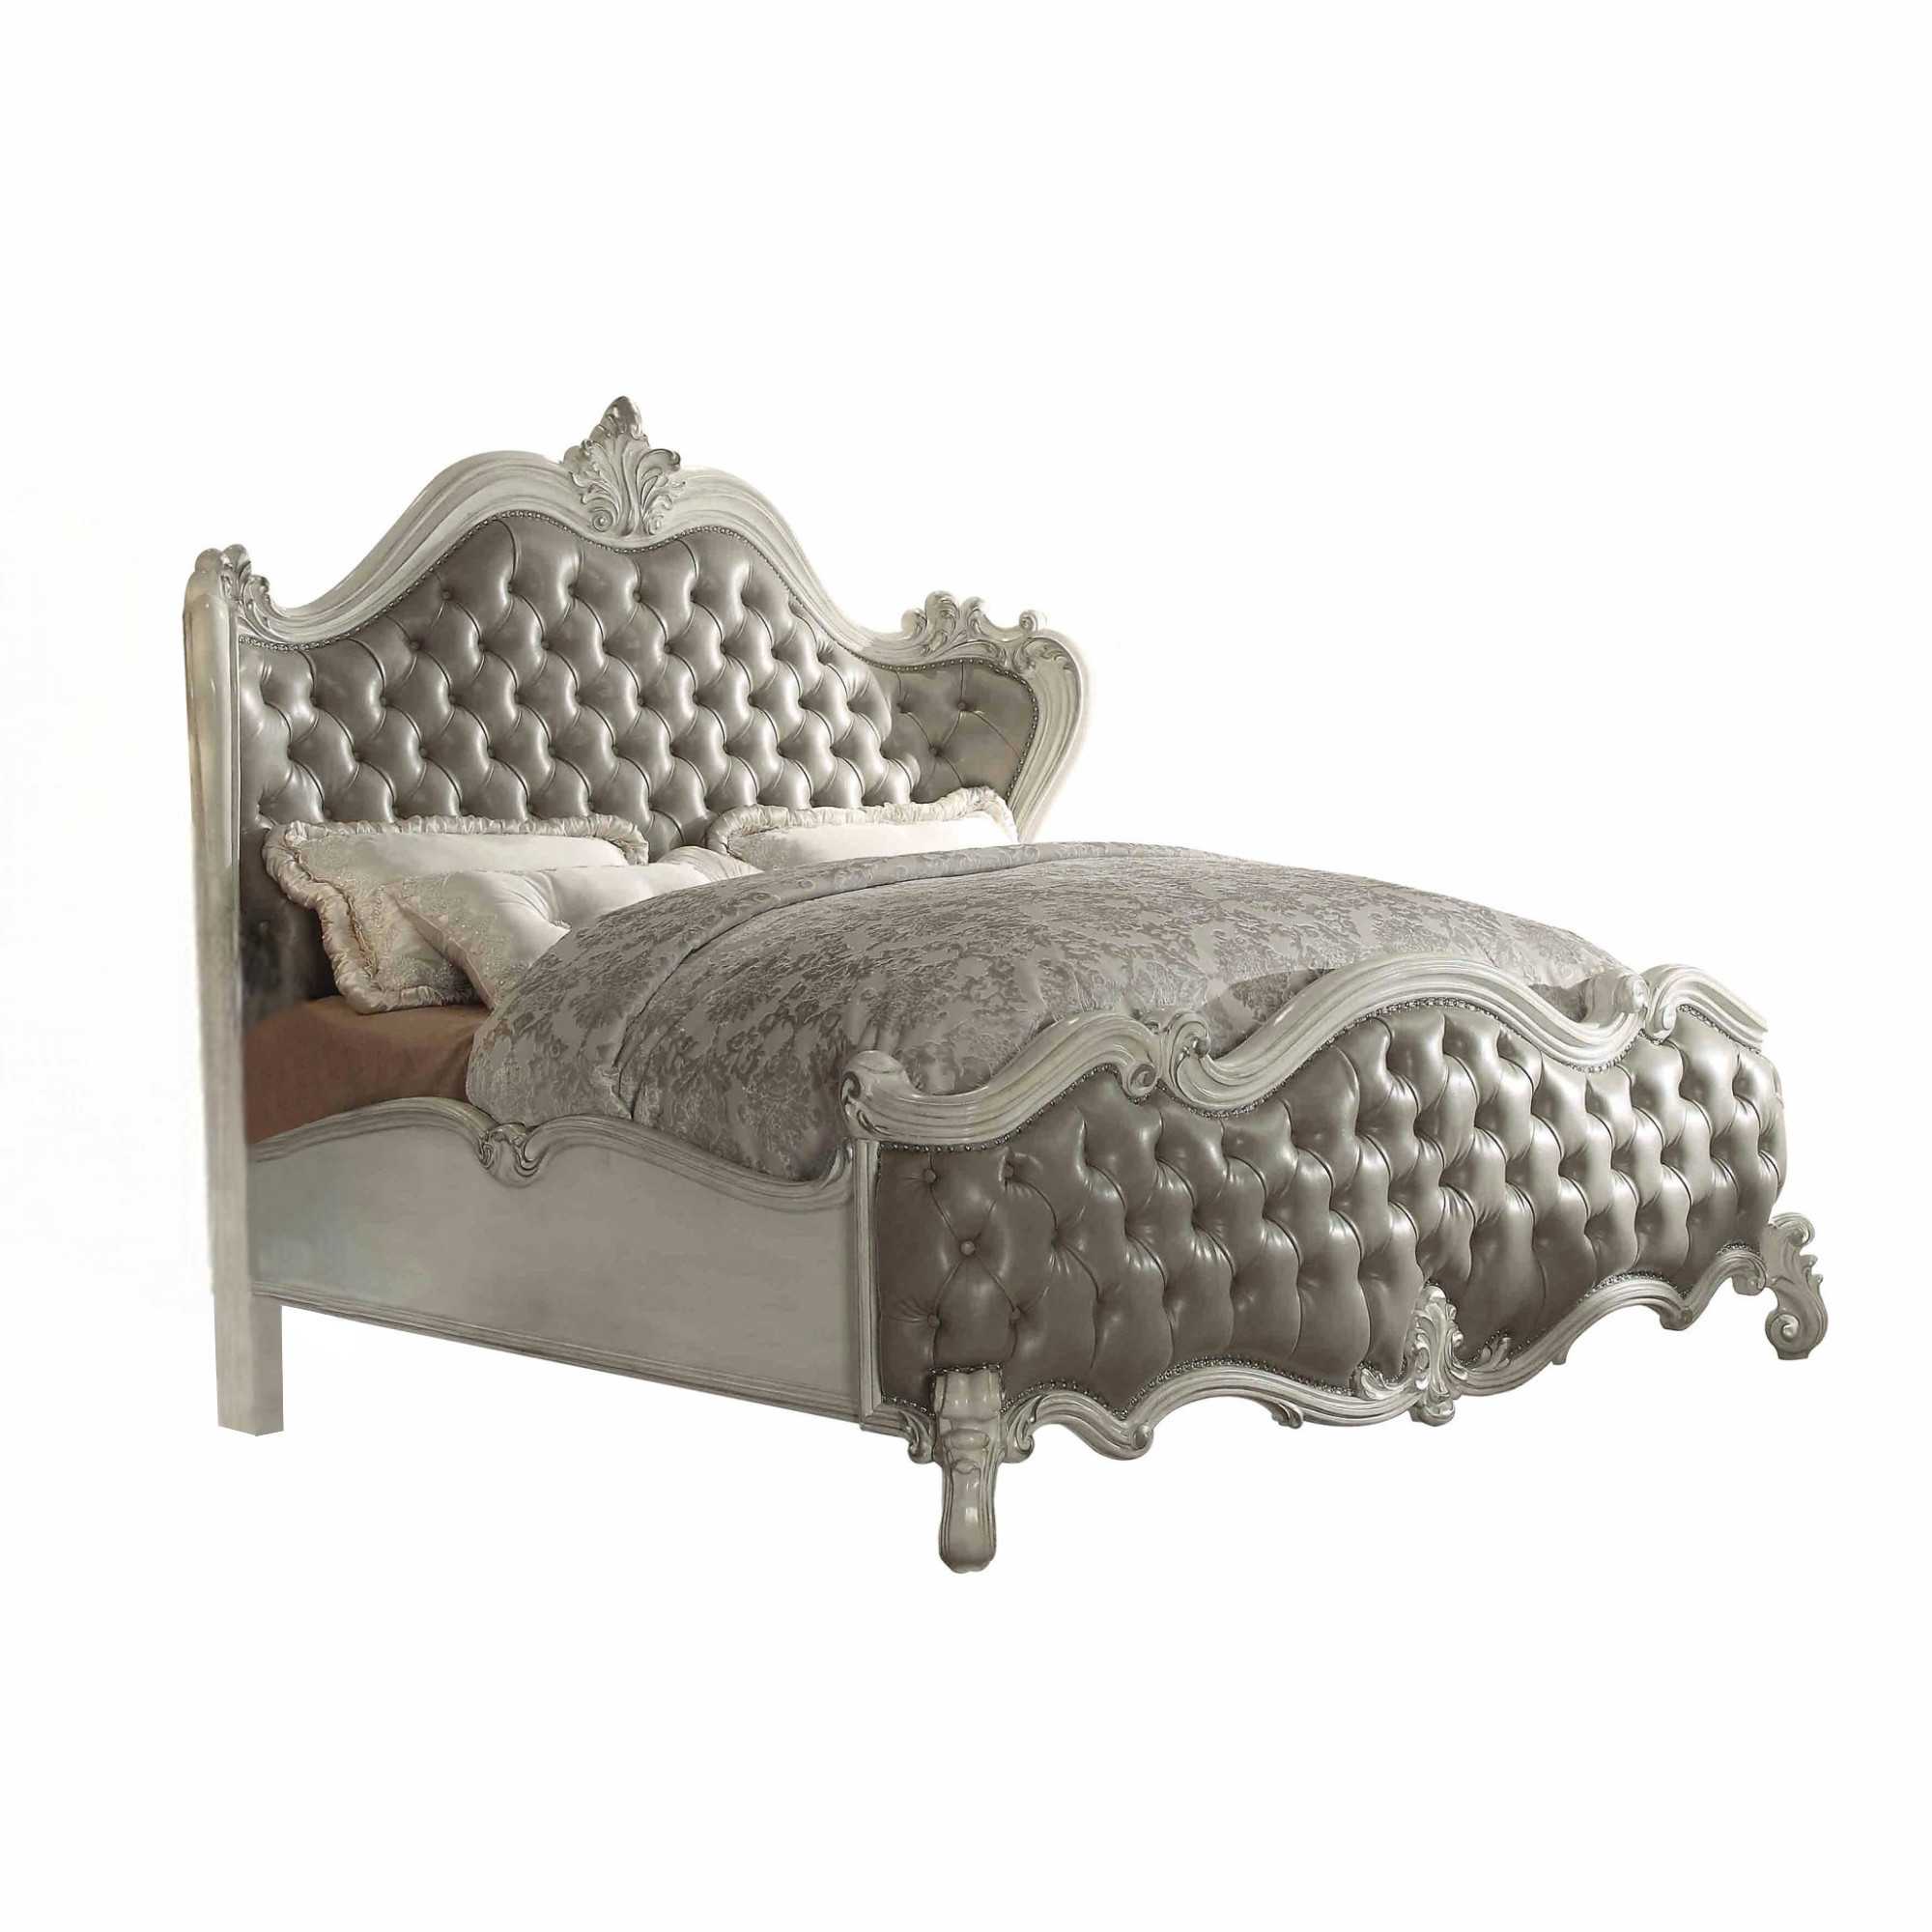 King Tufted Ivory And Gray Upholstered Faux Leather Bed With Nailhead Trim-348178-1